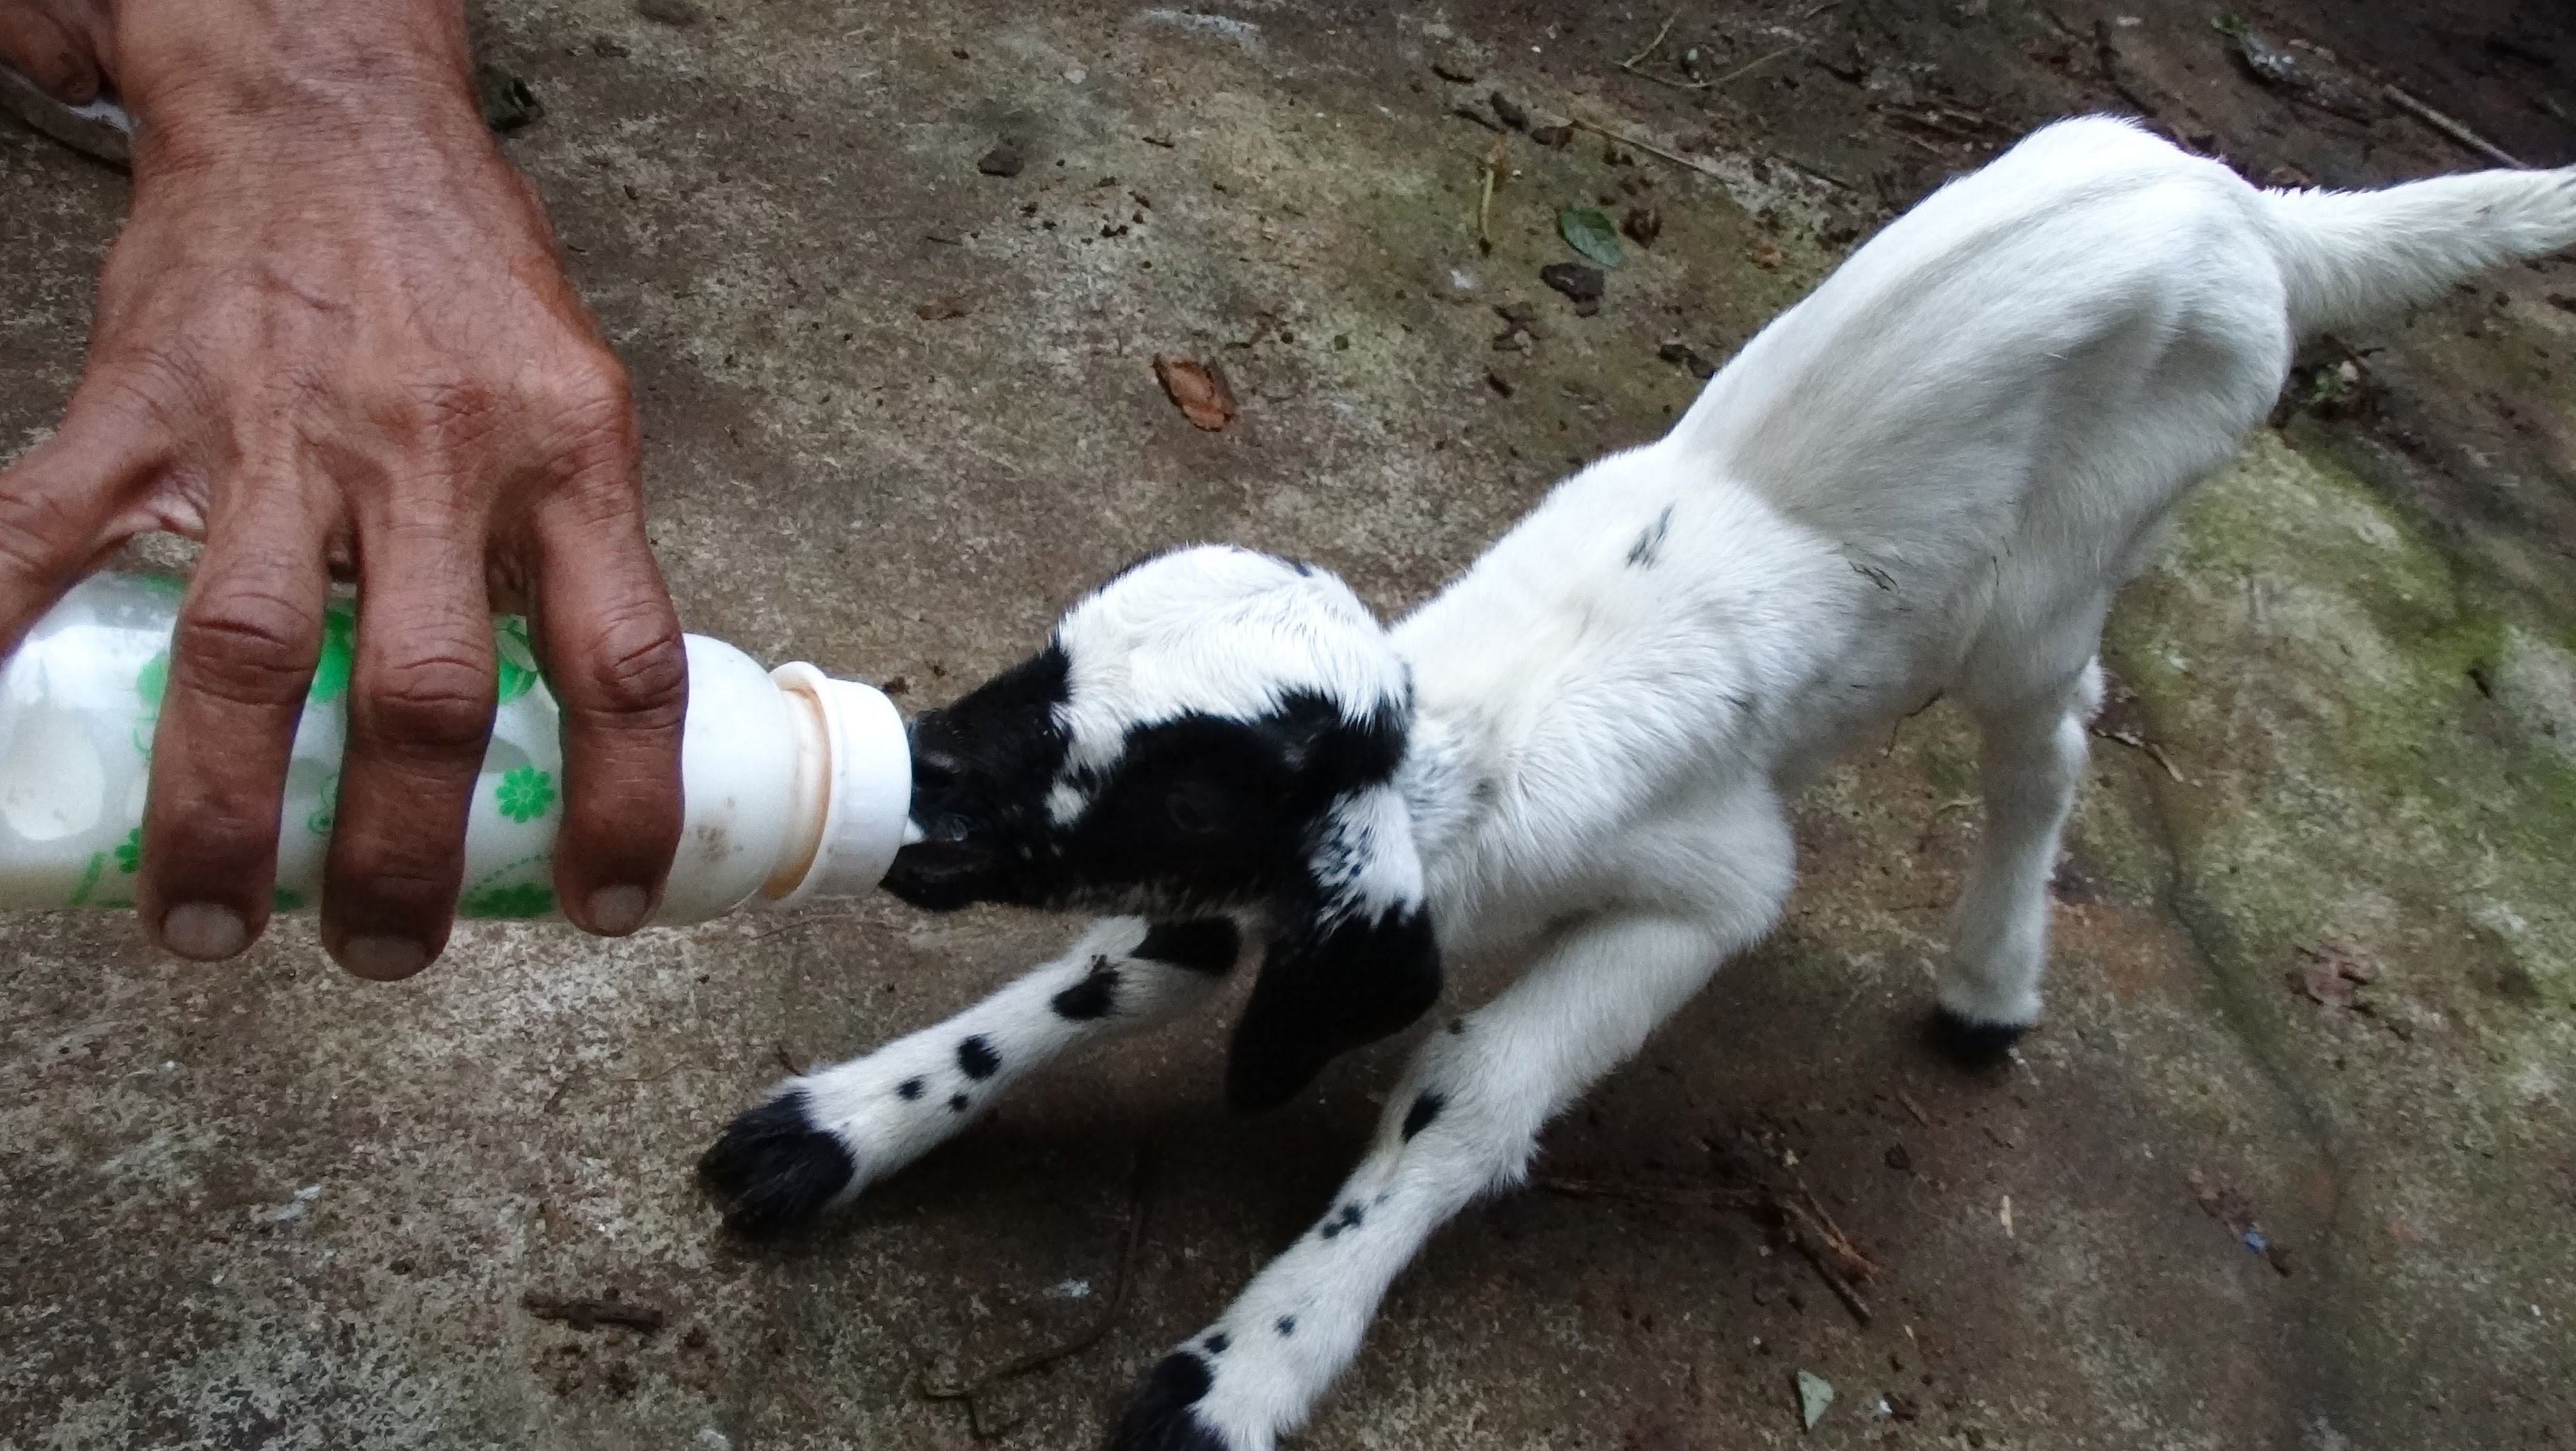 SMALL GOATS DRINK MILK FROM THE BOTTLE - YouTube